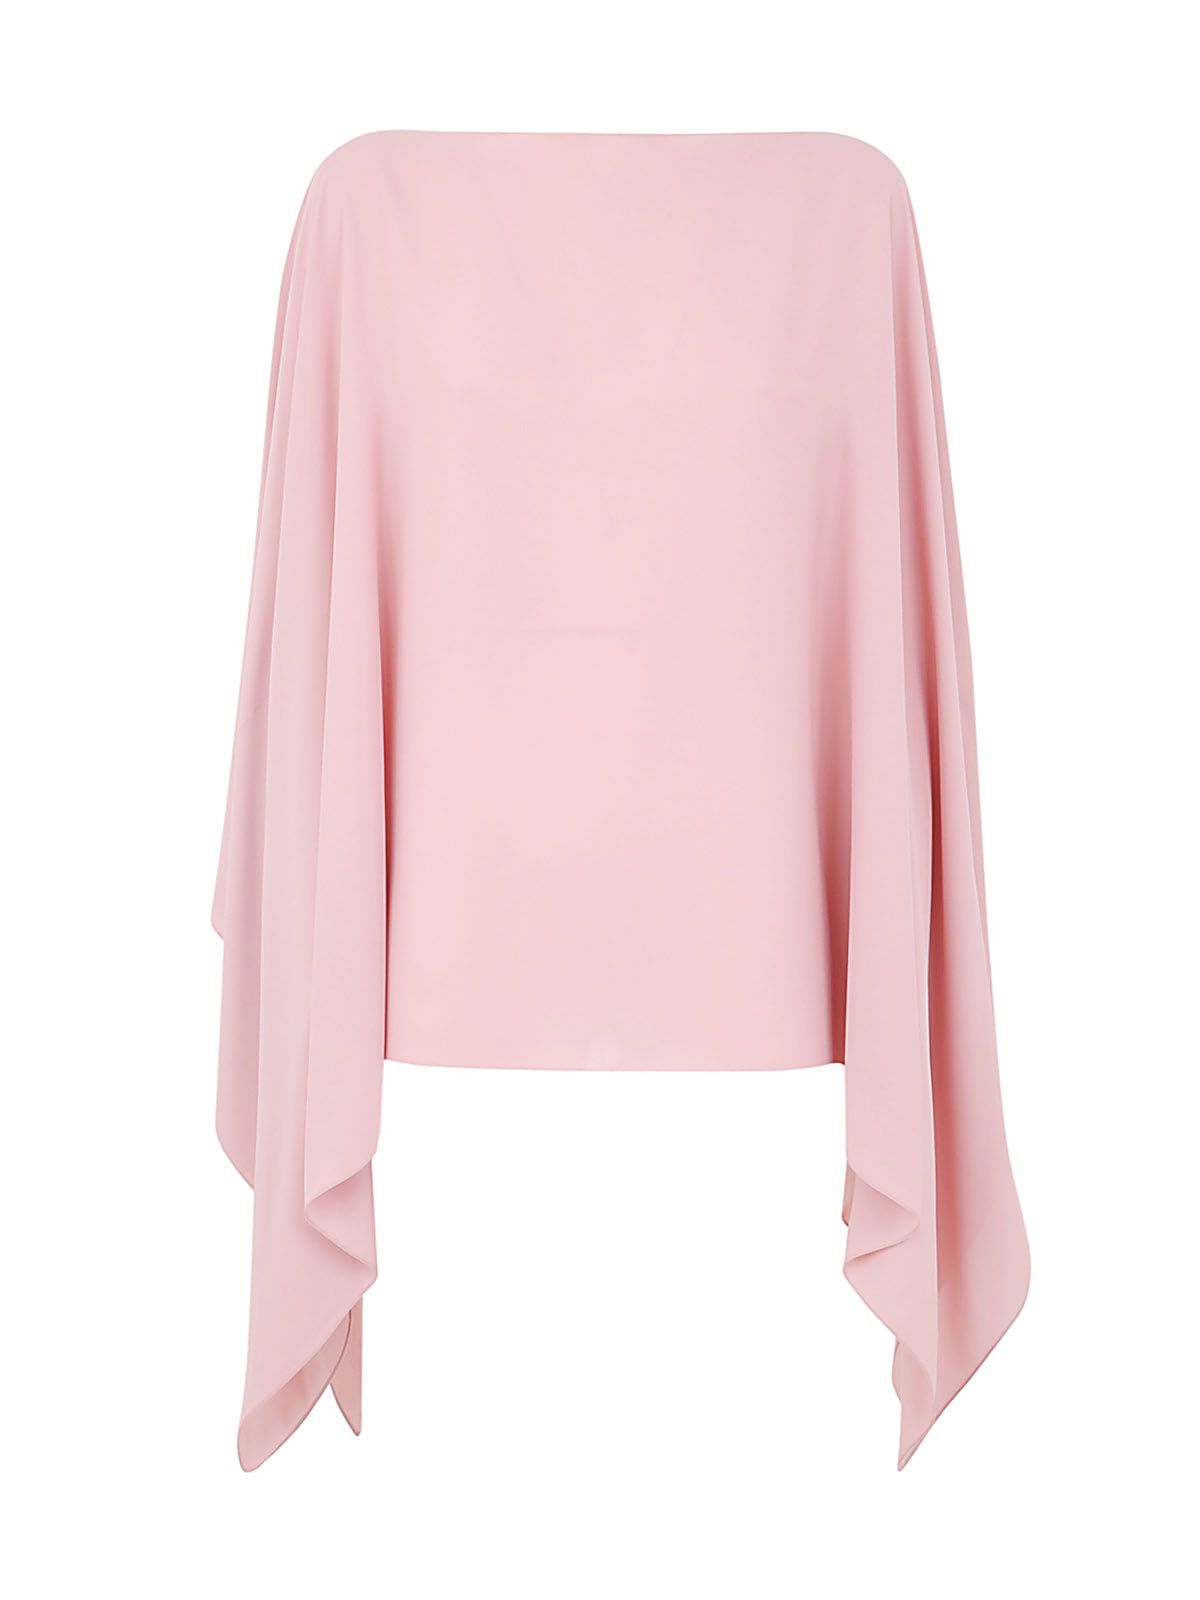 Gianluca Capannolo Eve Top In Pink